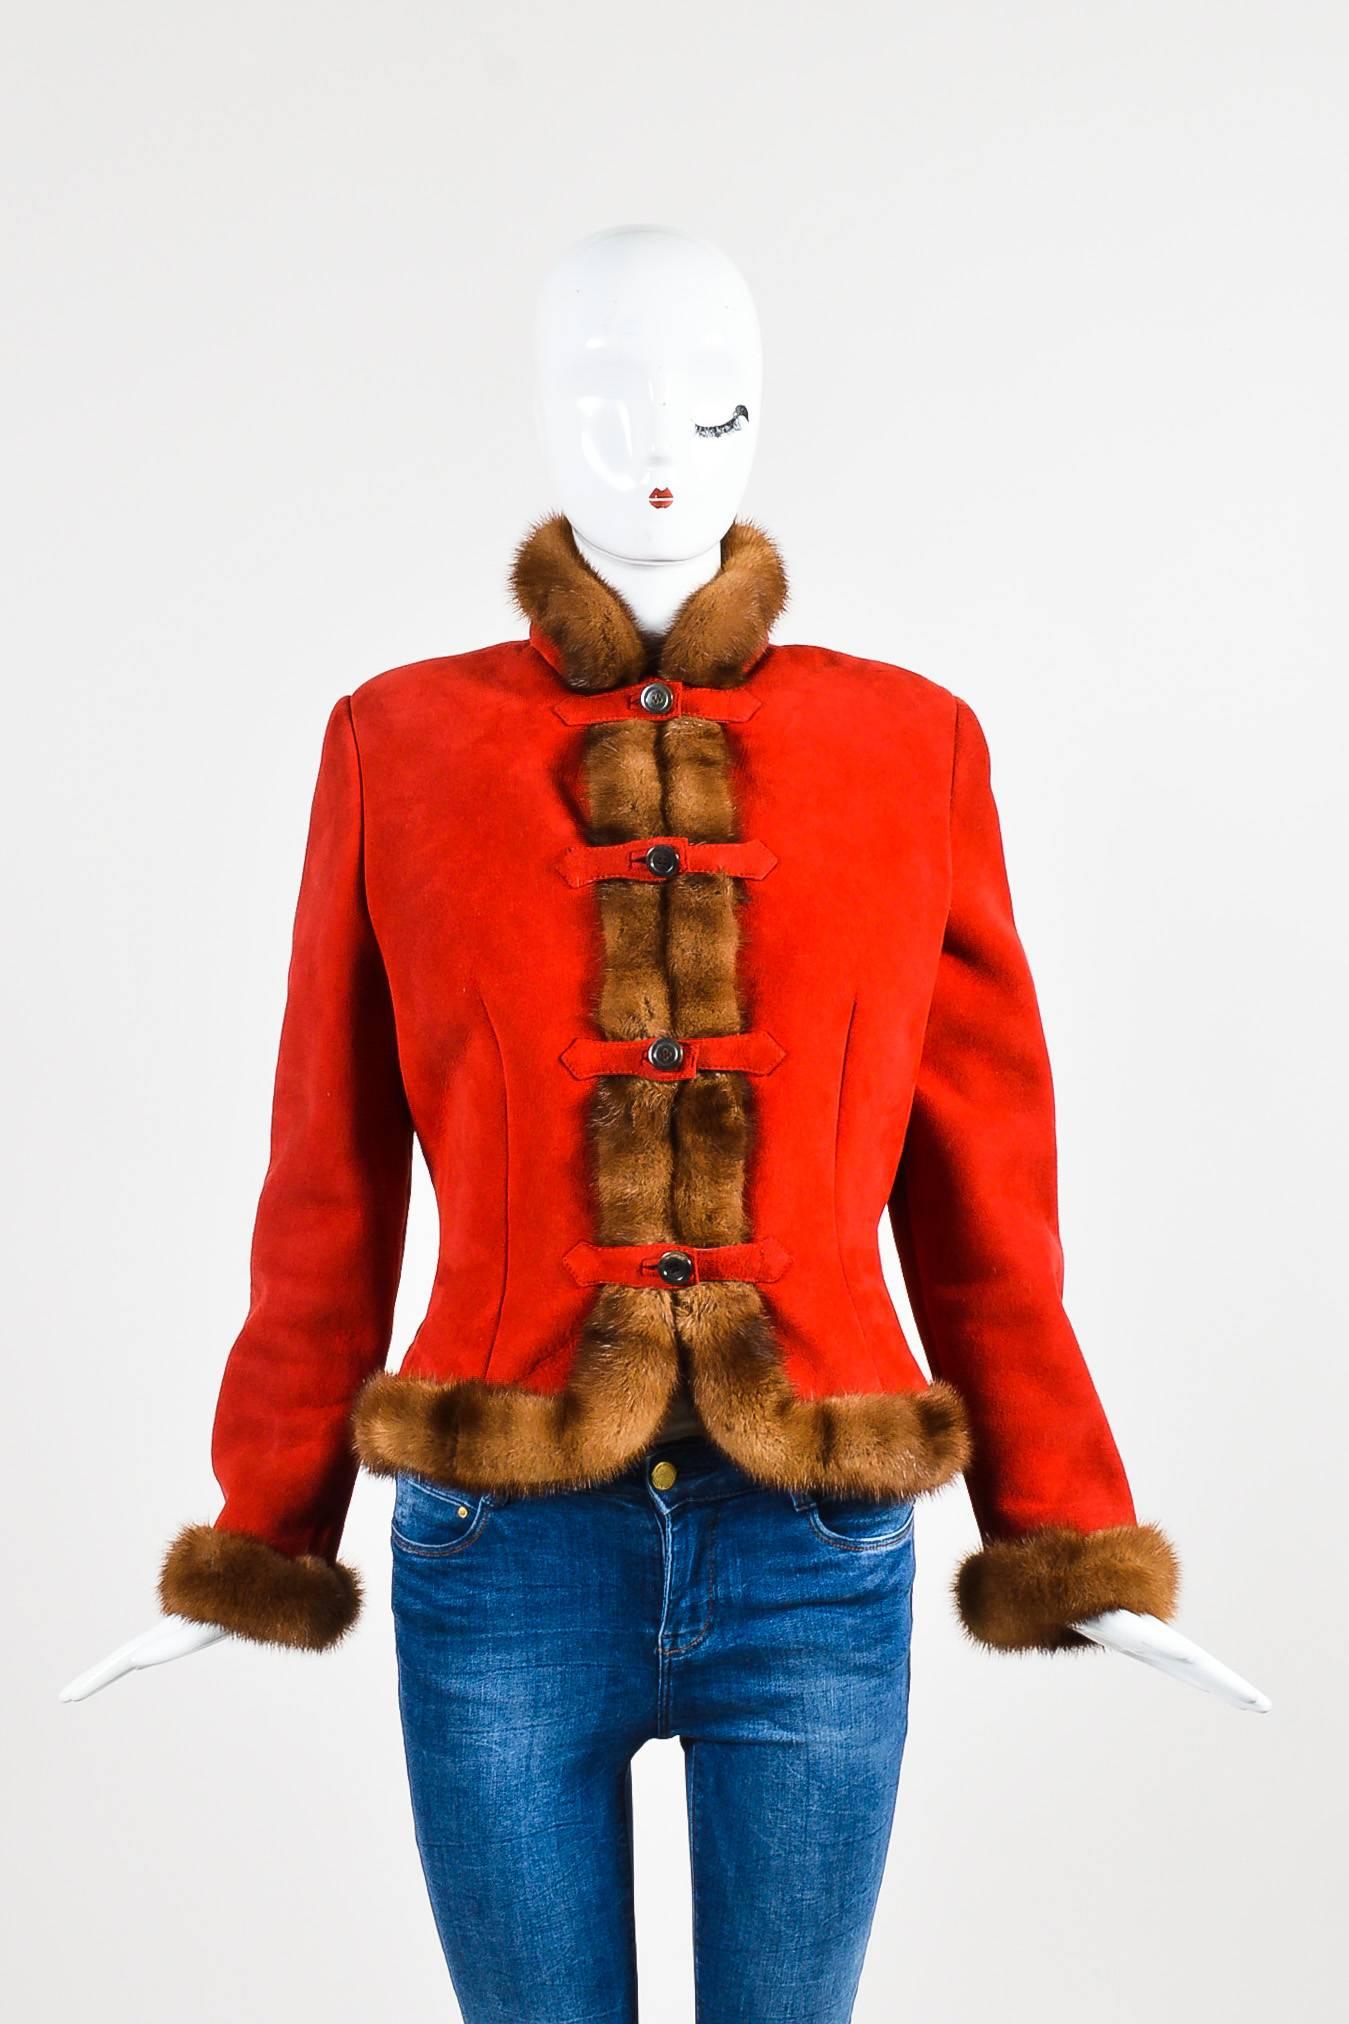 Cold weather jacket. Red suede with brown fur trim. Long sleeves. Darting on bodice. Padded shoulders. Straps with button closures down front. Shearling interior.

Additional measurements: Sleeve Length 23.375", Shoulder -to- Shoulder